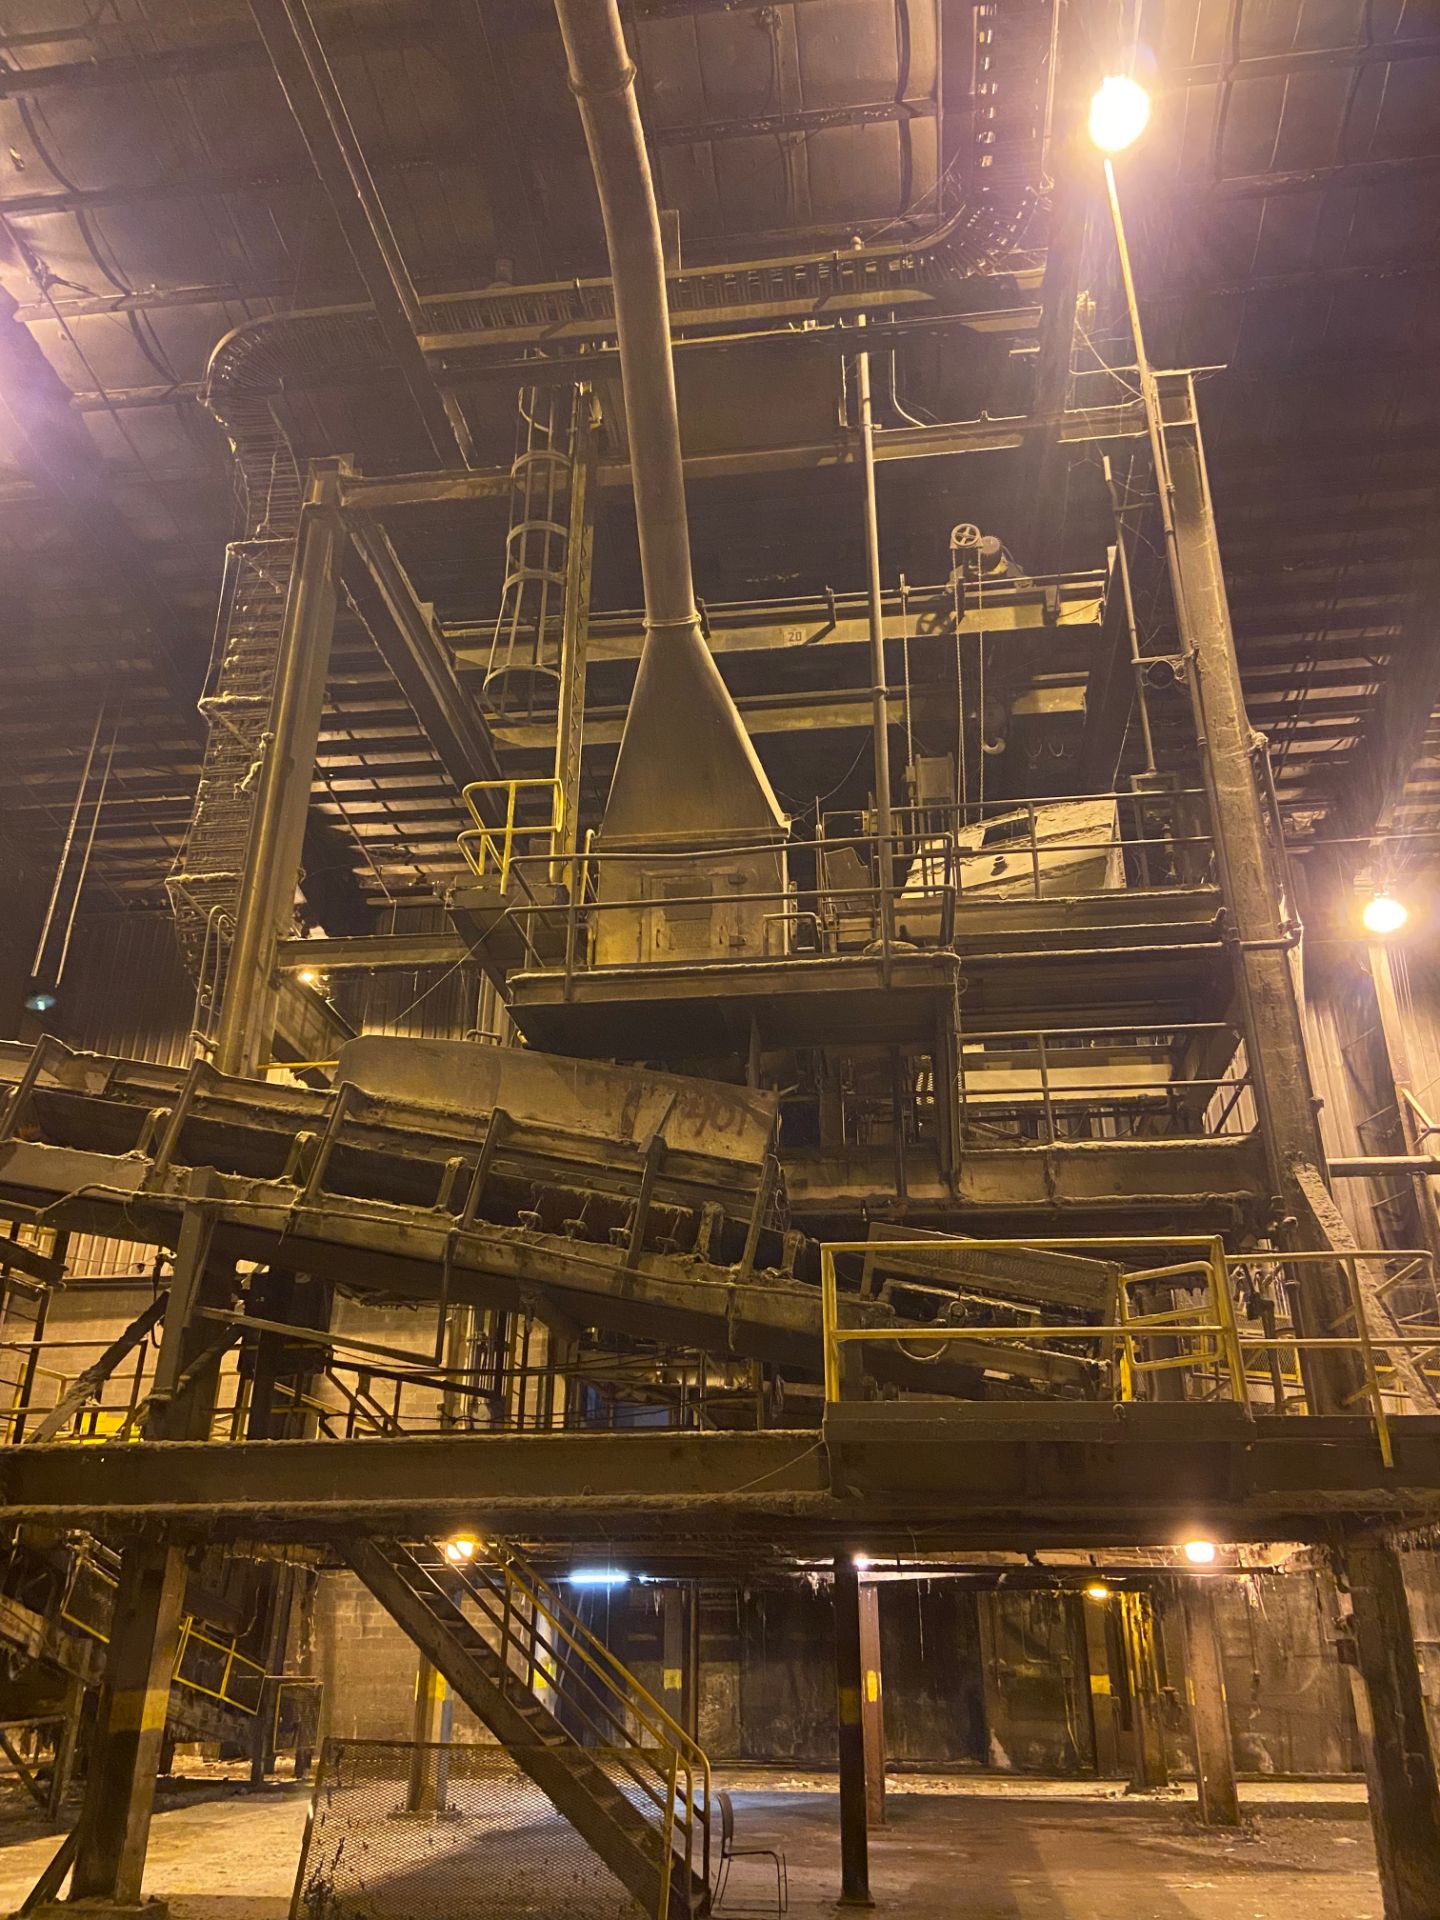 Mezzanines and Connected Conveyor (Cut off at Building Exterior), Rigging Fee: $25,000 - Image 8 of 11